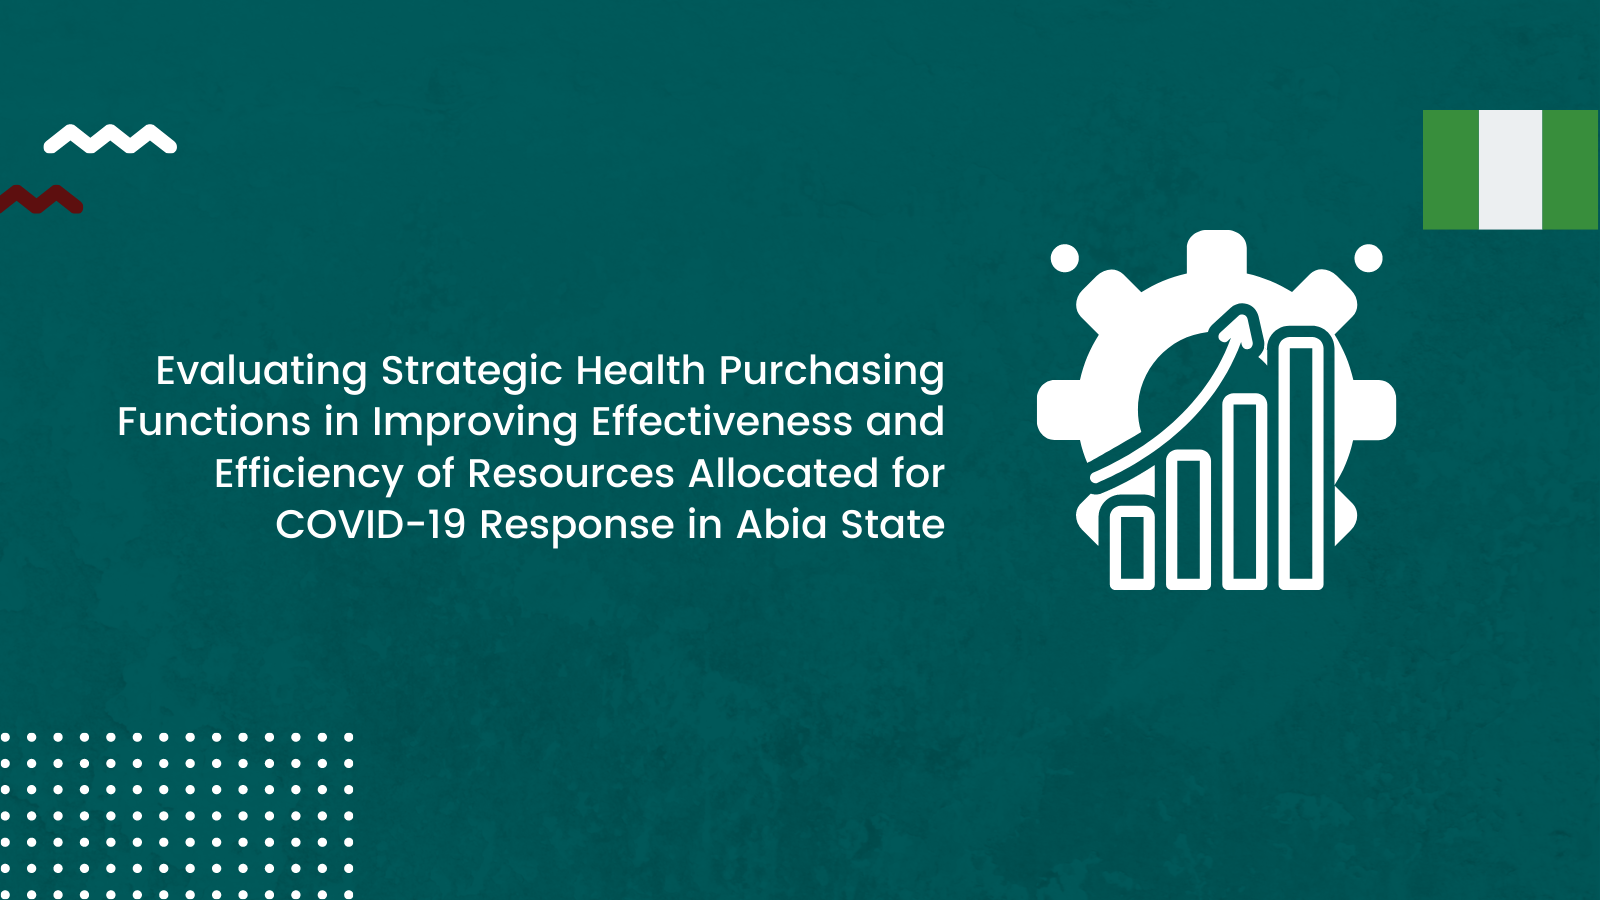 Evaluating Strategic Health Purchasing Functions in Improving Effectiveness and Efficiency of Resources Allocated for COVID-19 Response in Abia State